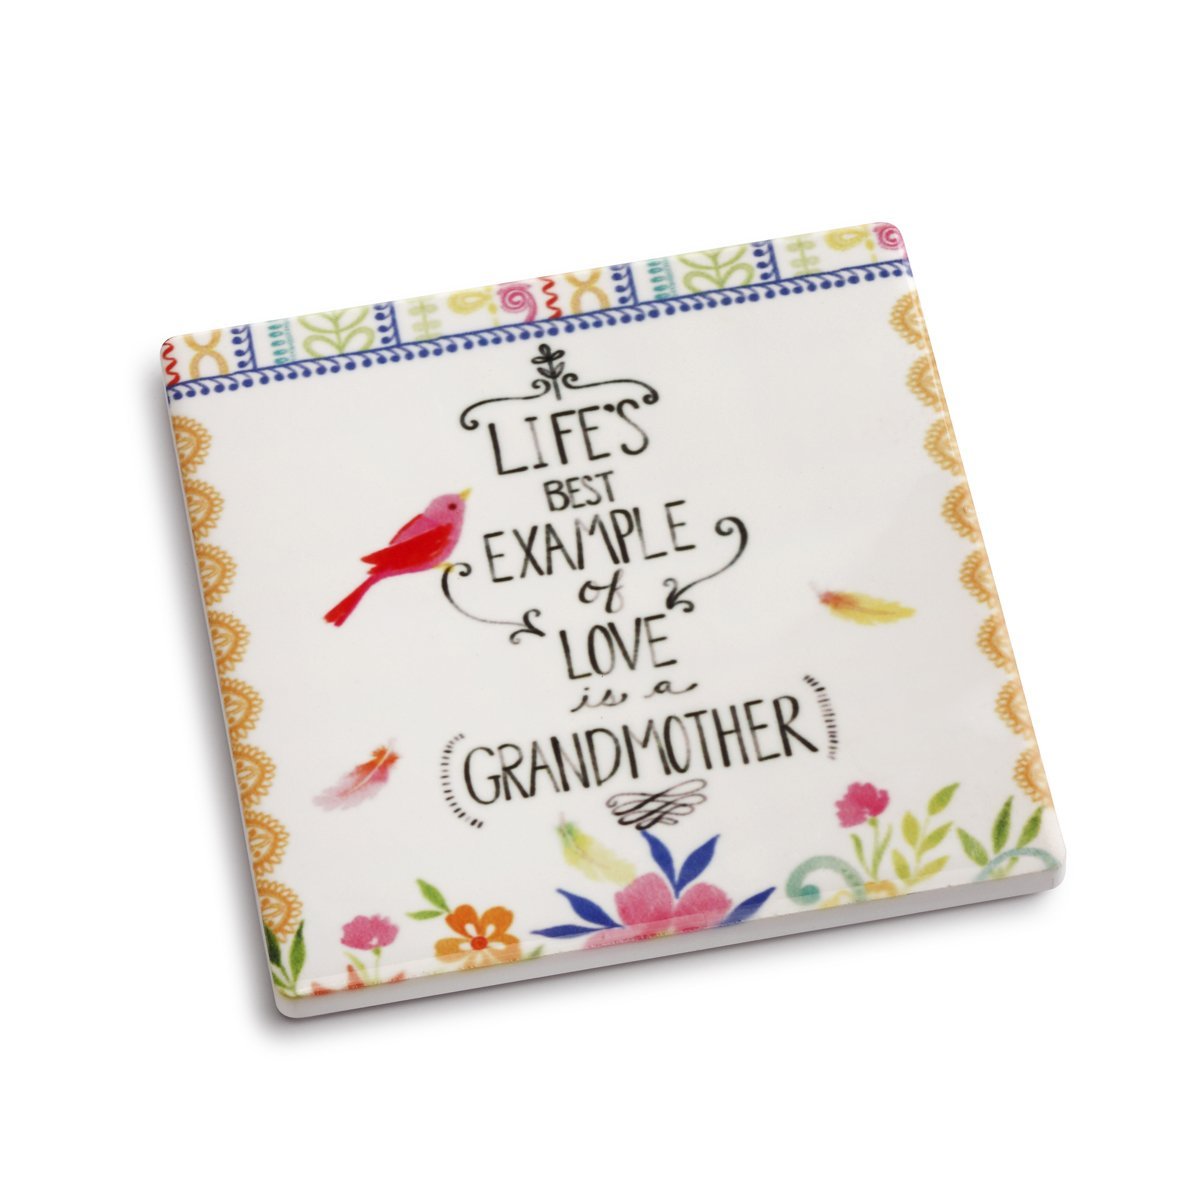 Life's Best Example of Love is A Grandmother Stone Coaster